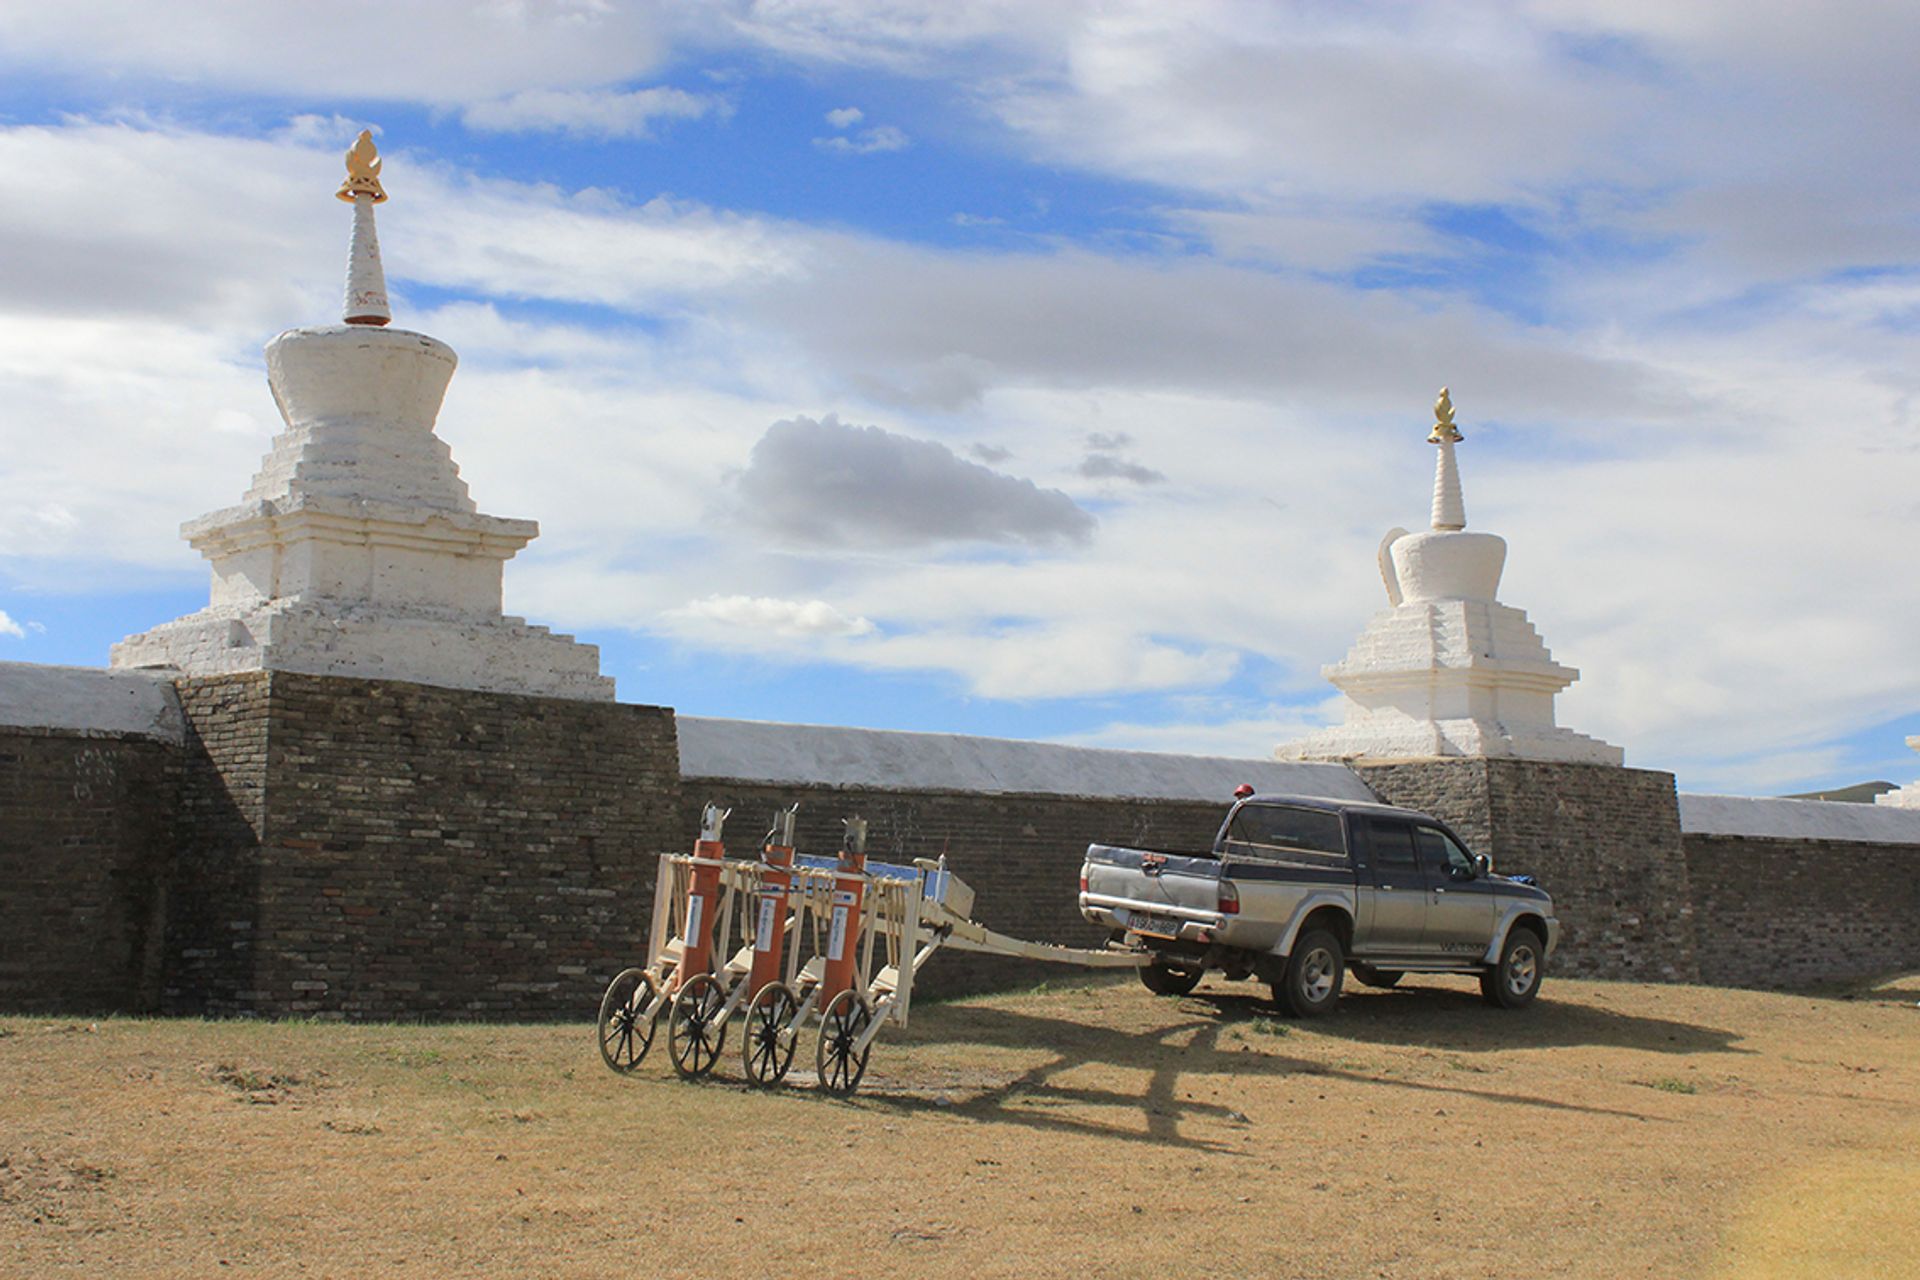 The vehicle-drawn SQUID measurement system at work in front of the Buddhist monastery of Erdene Zuu, founded in 1586 and probably erected on top of the former palace area of Karakorum © Photo by J. Bemmann